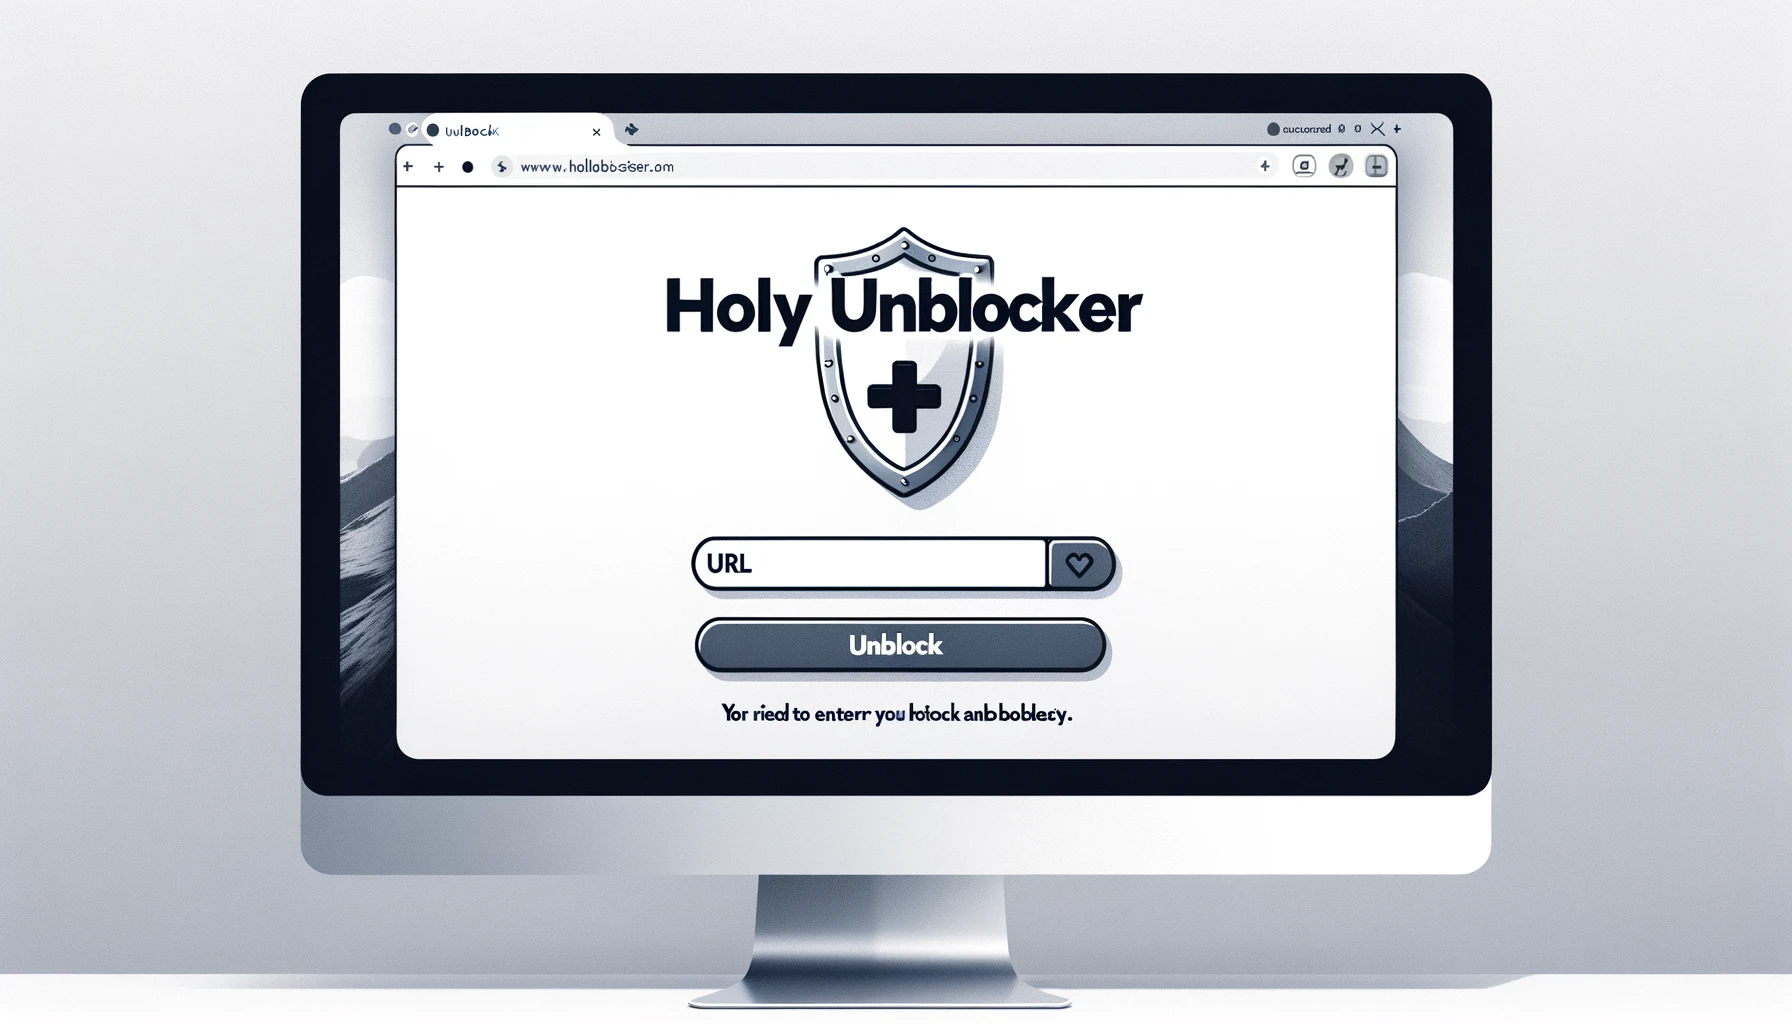 What is Holy Unblocker?